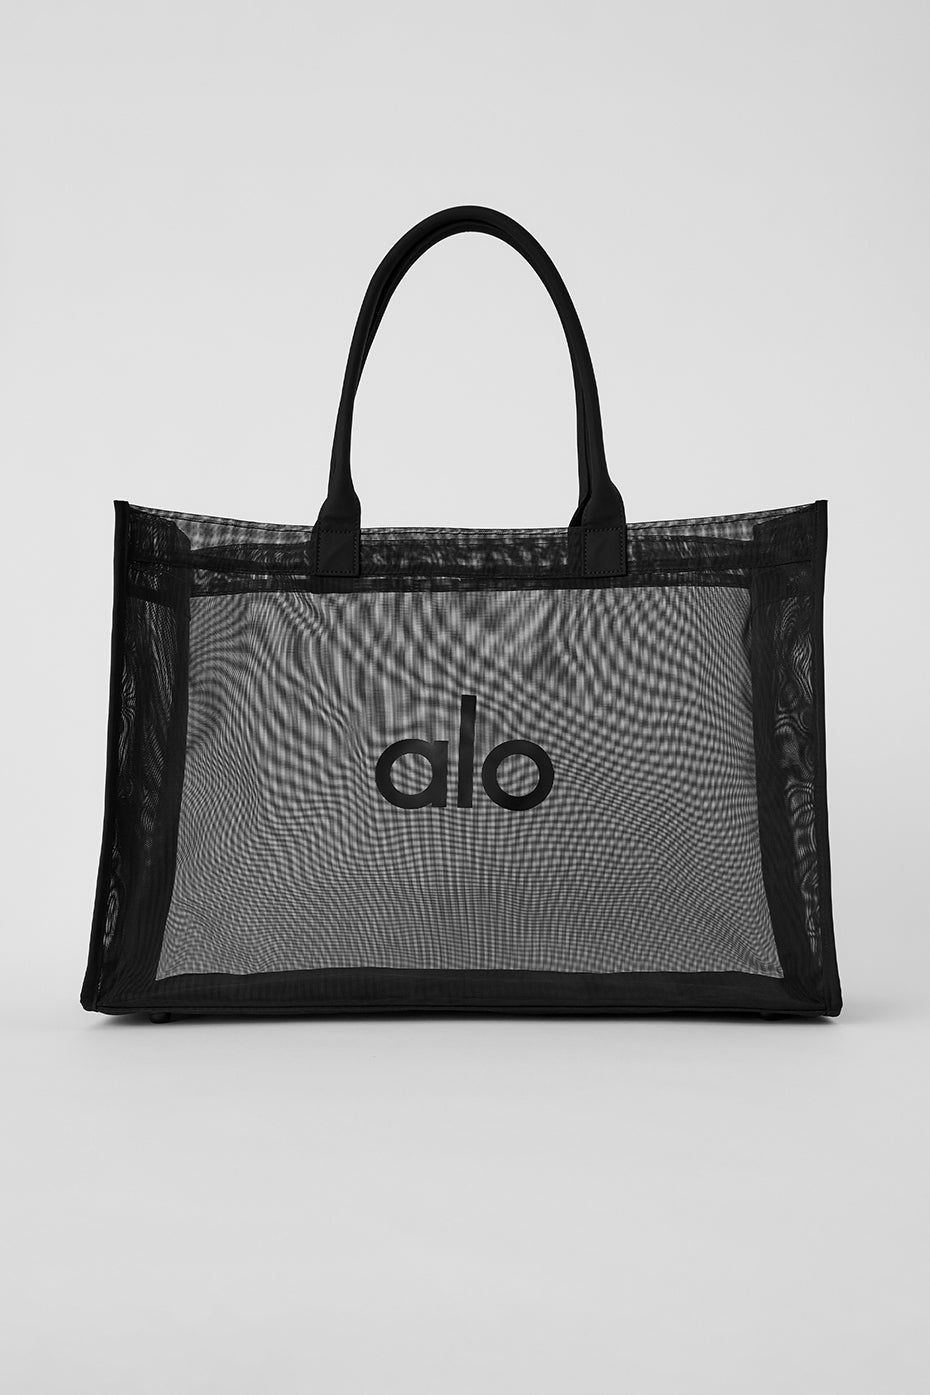 Epic Accessories For Studio & Street - Alo Yoga Email Archive